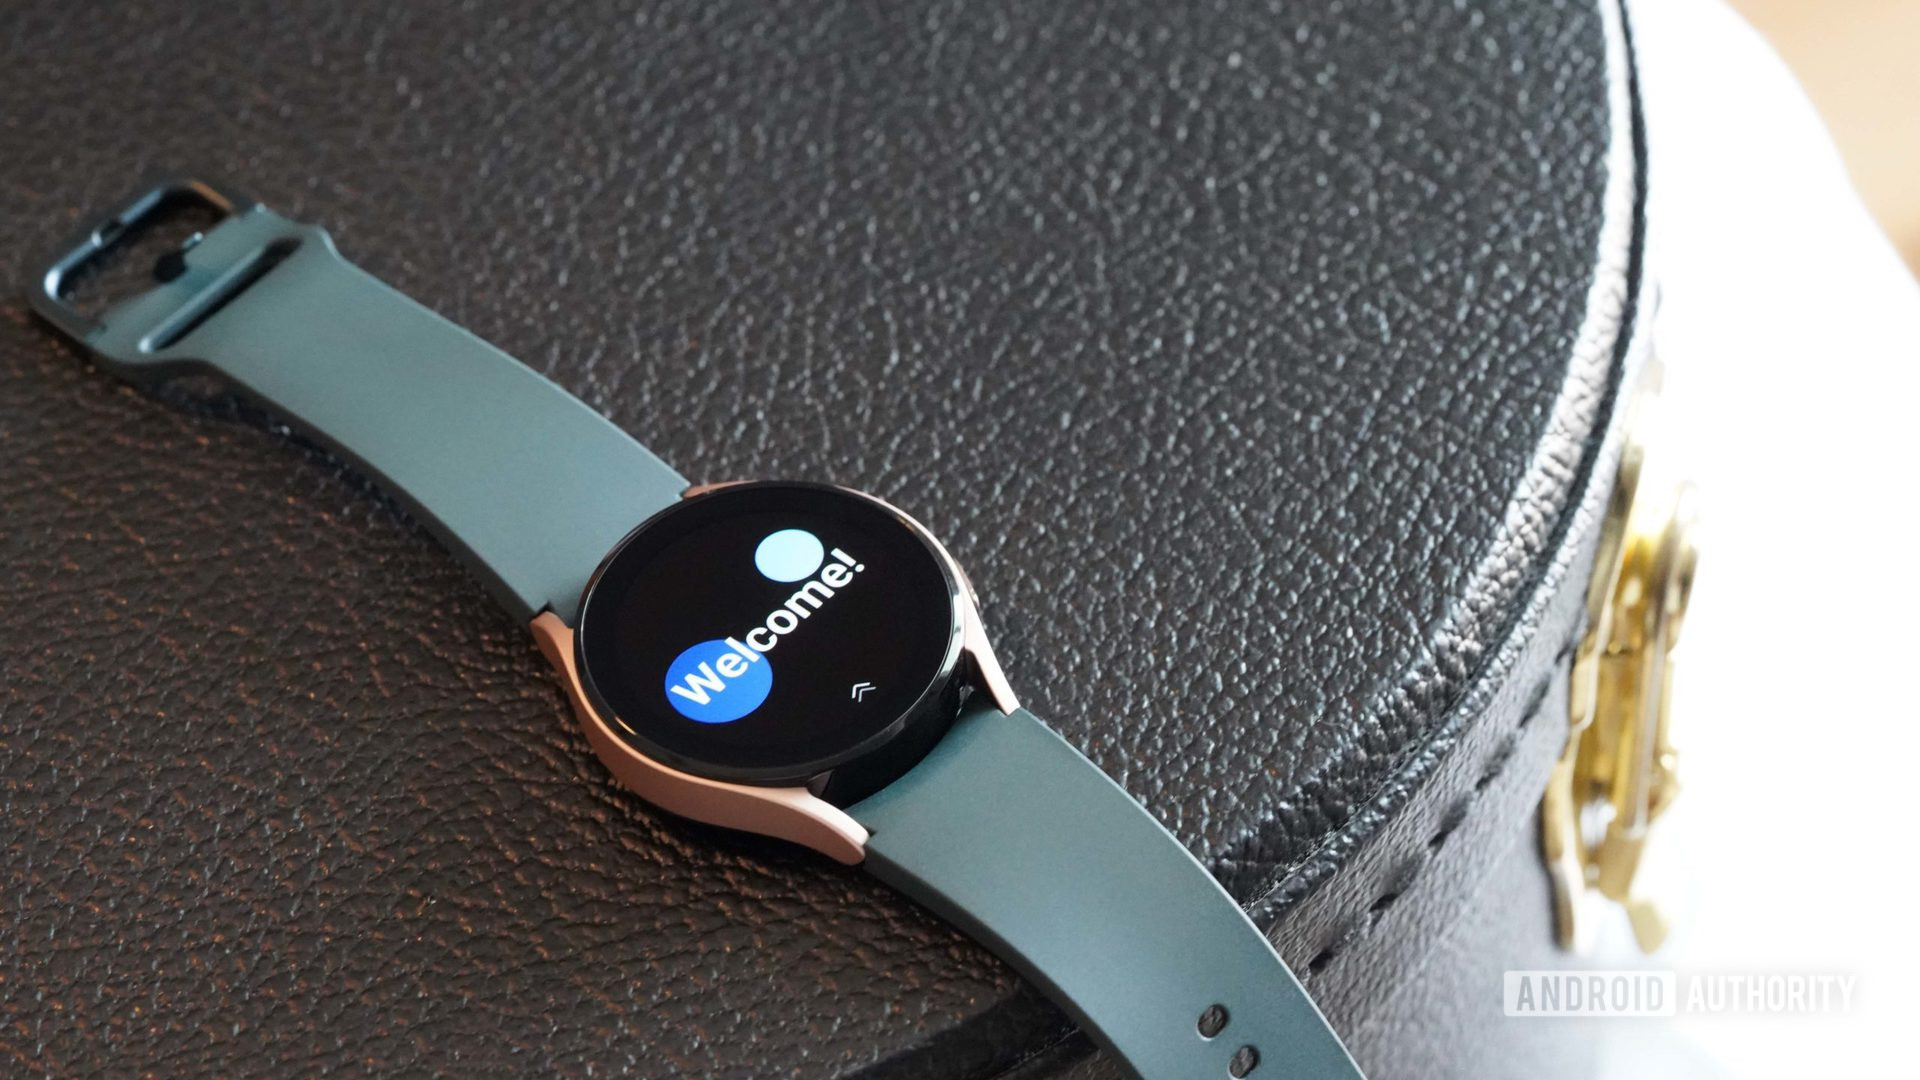 A Samsung Galaxy Watch 4 rests on a black leather case displaying the watches Welcome screen.